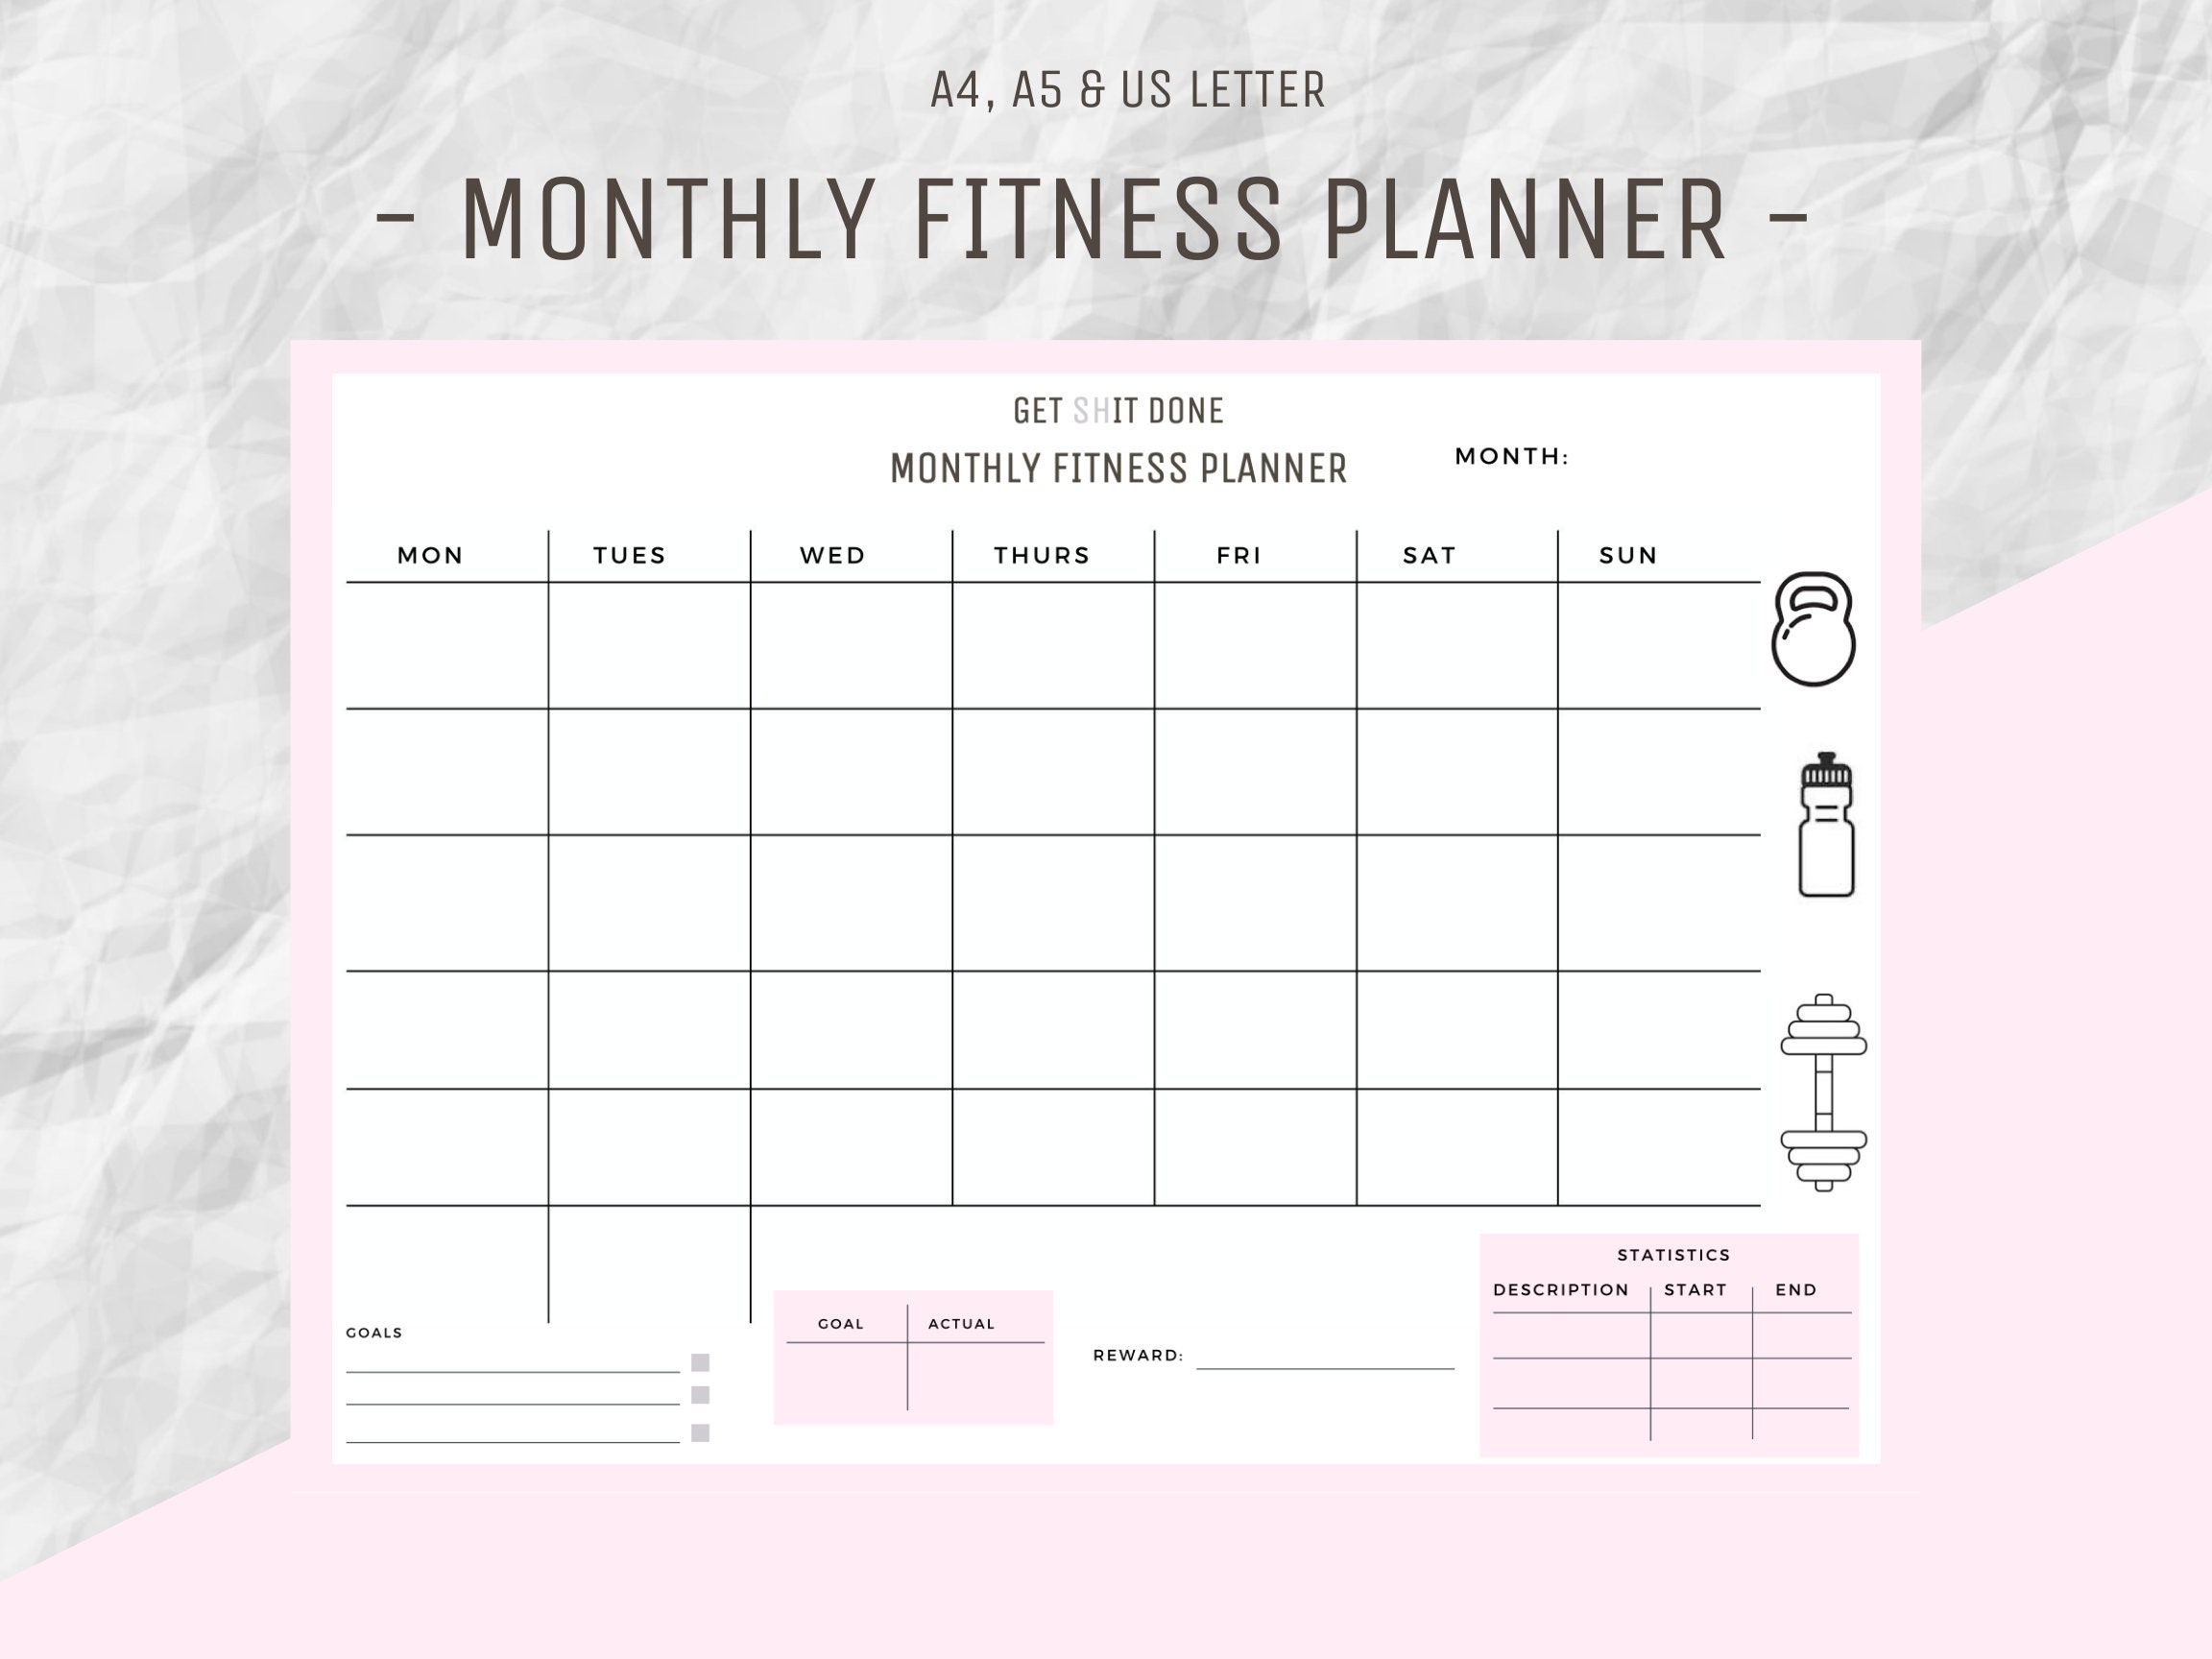 a5-monthly-workout-tracker-workout-tracker-journal-exercise-printable